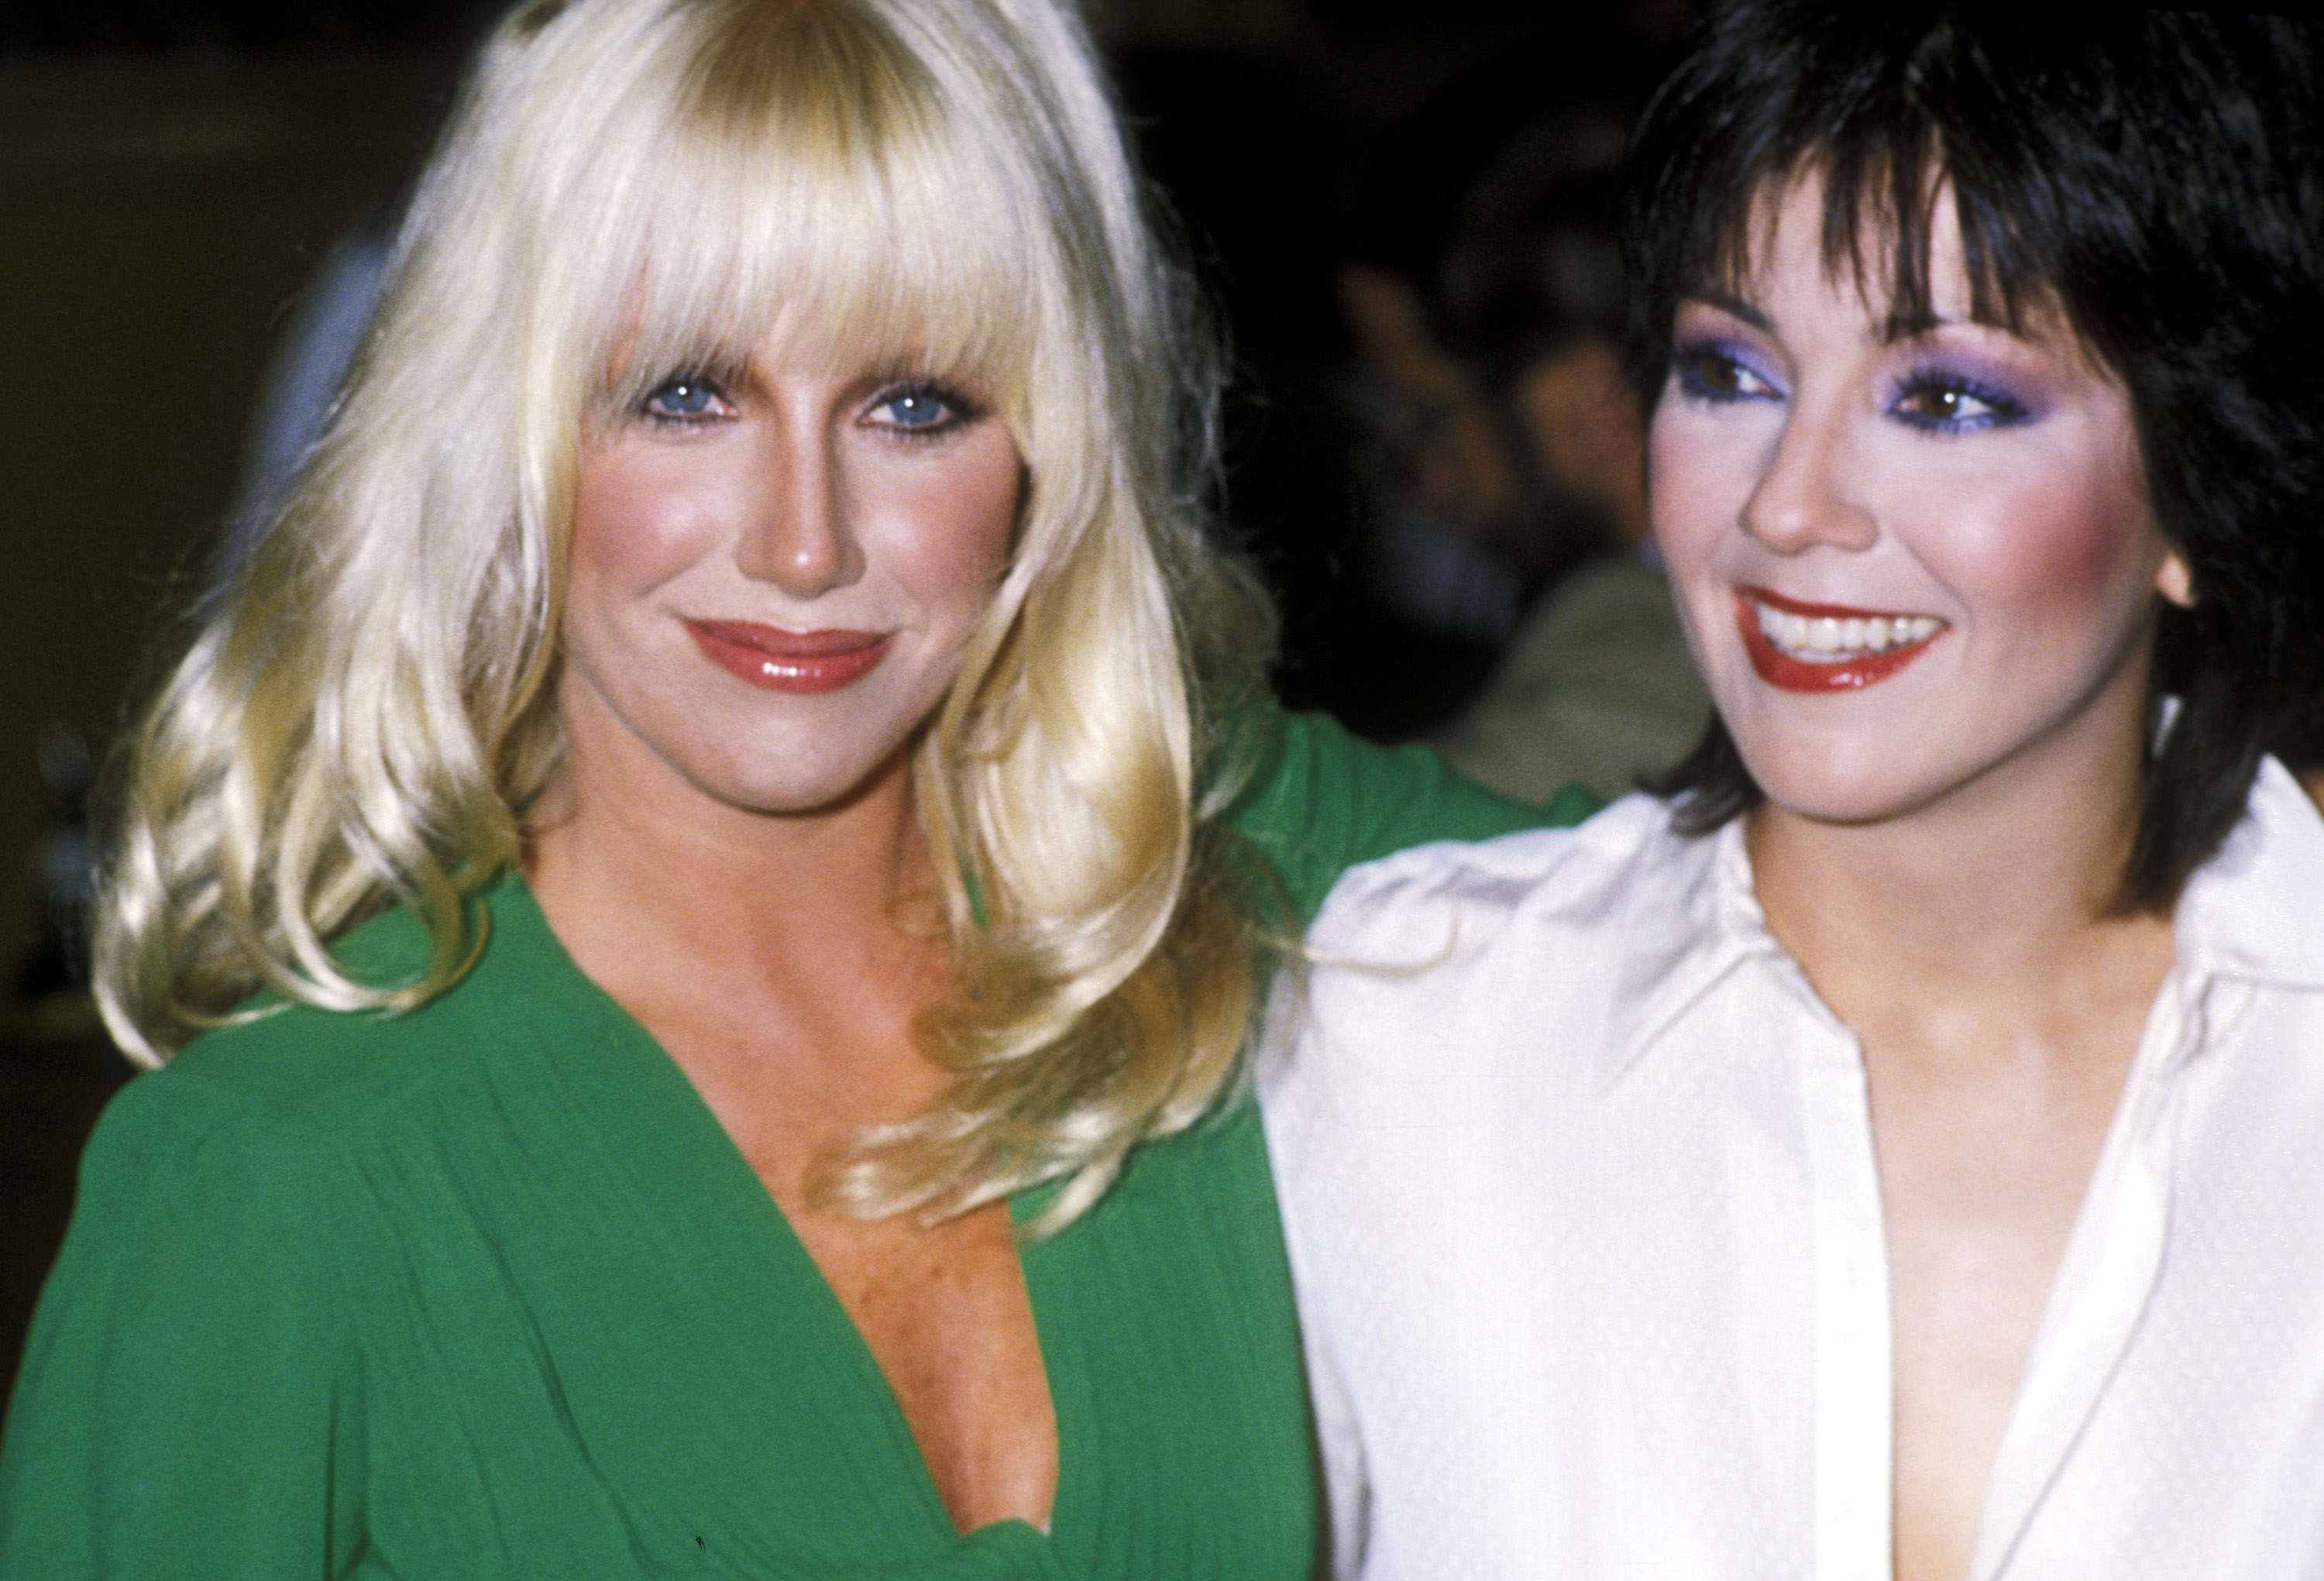 Actress Suzanne Somers and Joyce DeWitt during Press Preview and Luncheon For "Three's Company" and "The Ropers" at Beverly Hilton Hotel on September 5, 1979 in Beverly Hills, California | Source: Getty Images